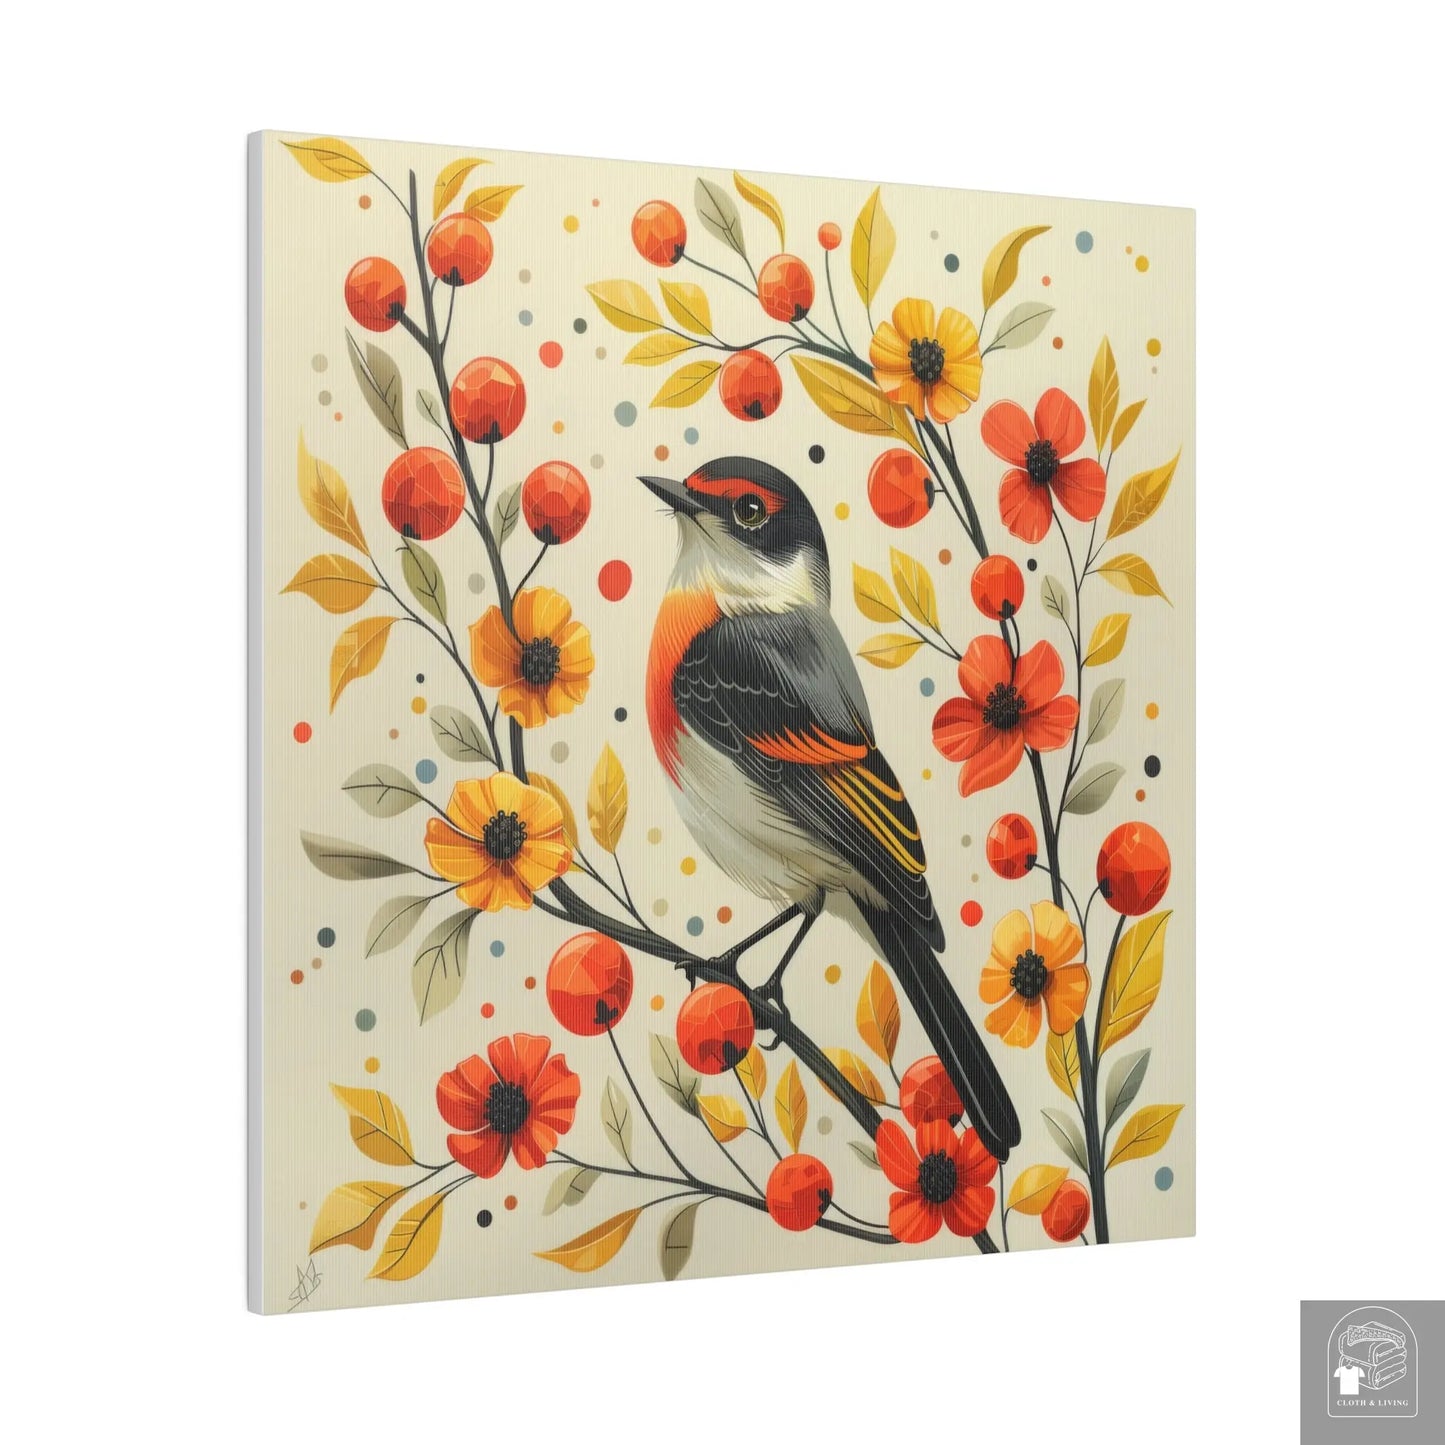 Harmony in Autumn - Bird & Floral Canvas Art (Available in 3 sizes) -   Cloth & Living